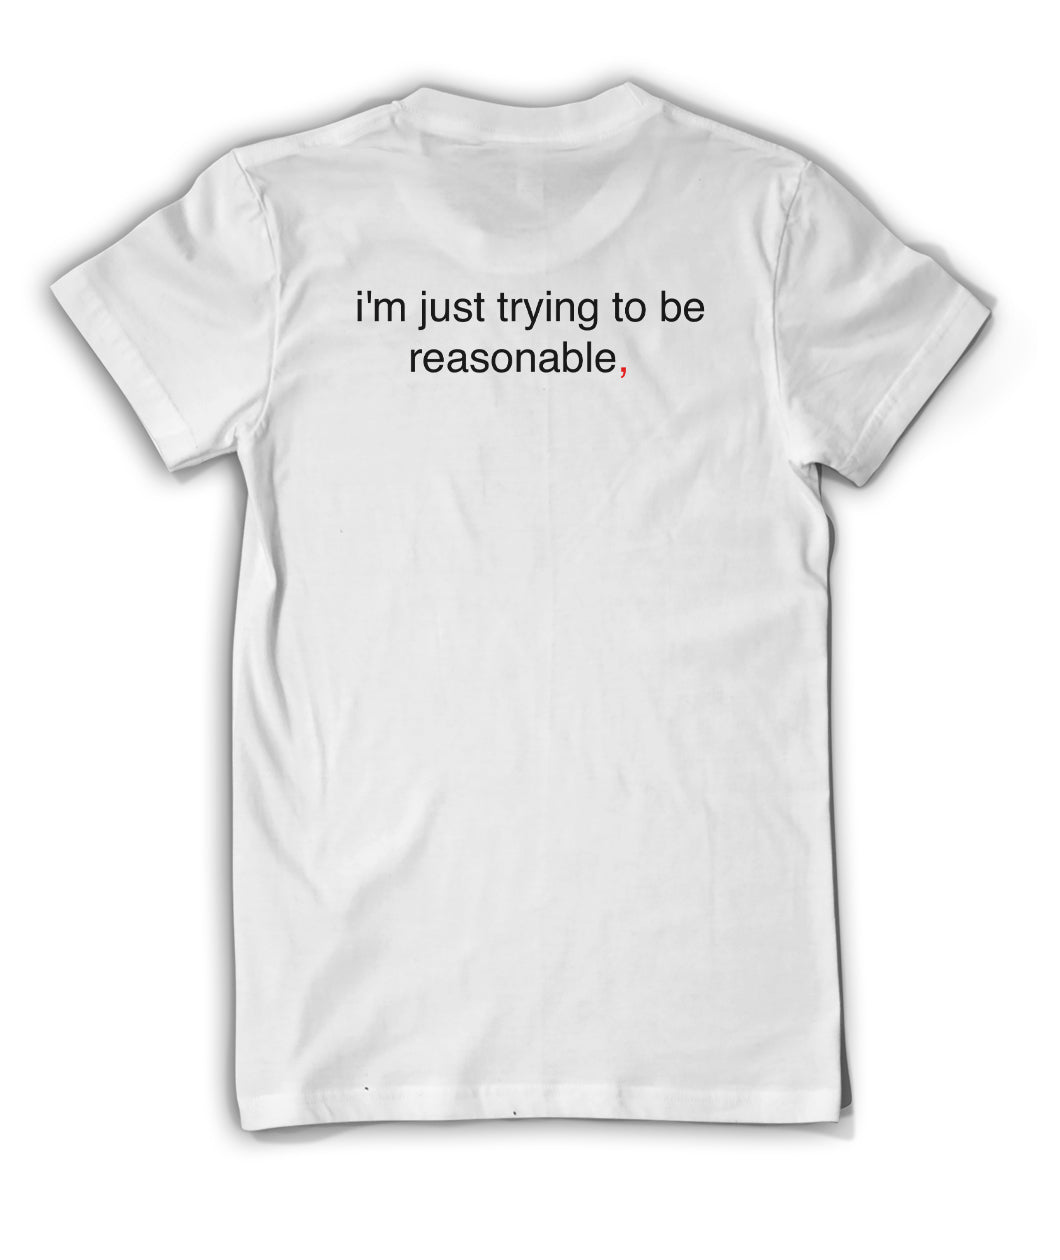 The back of the shirt reads "i'm just trying to be reasonable,". From Bill Wurtz. 